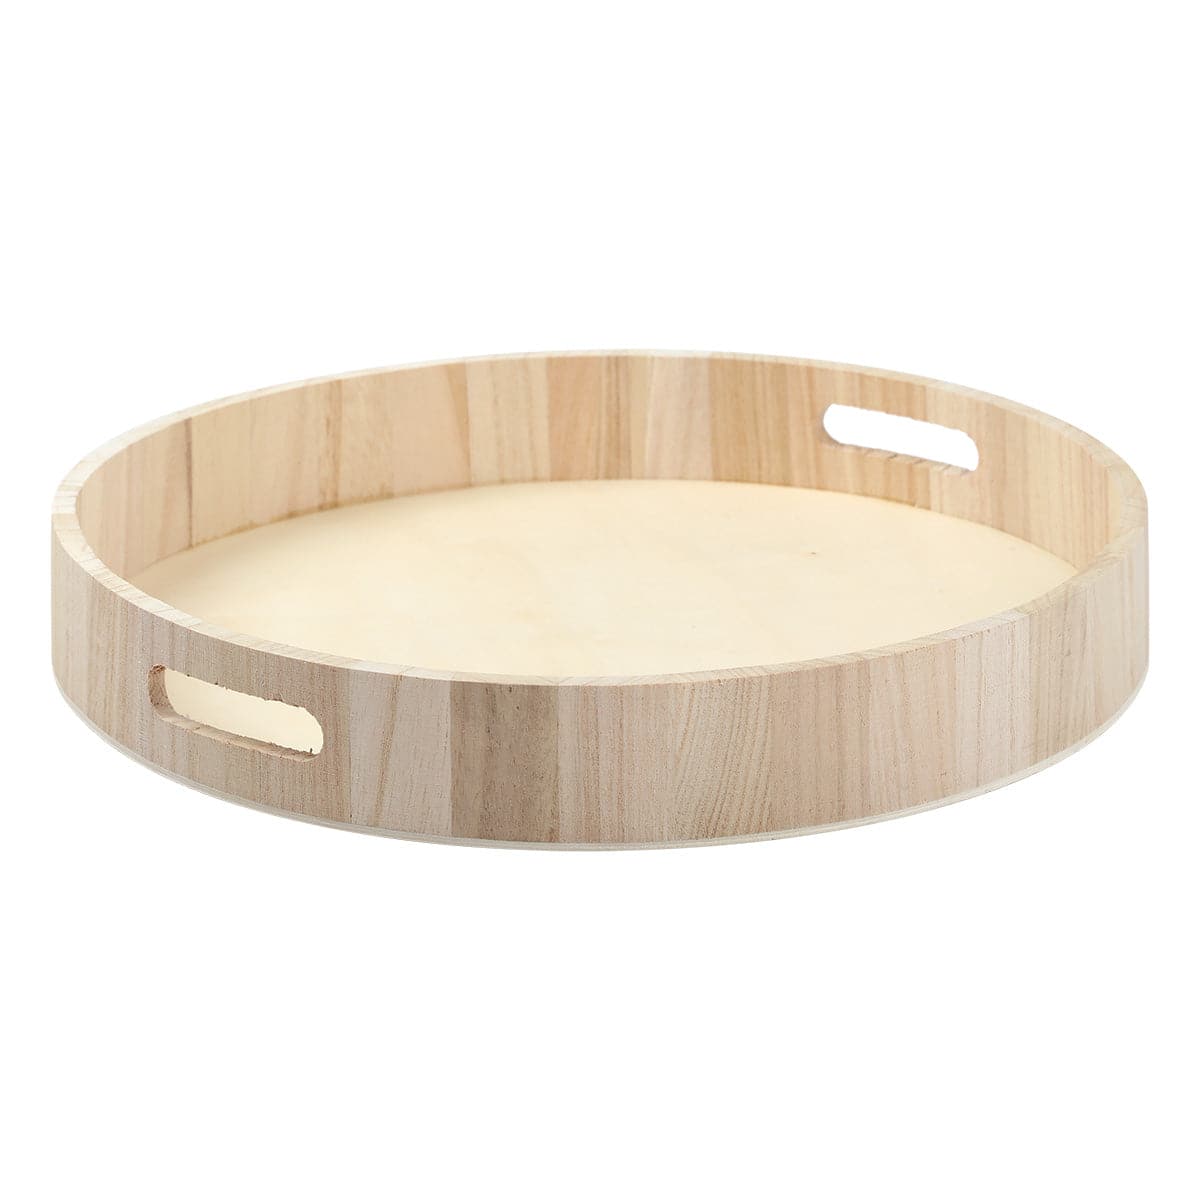 Image of Urban Crafter Round Wooden Drinks Tray 35cm Diameter